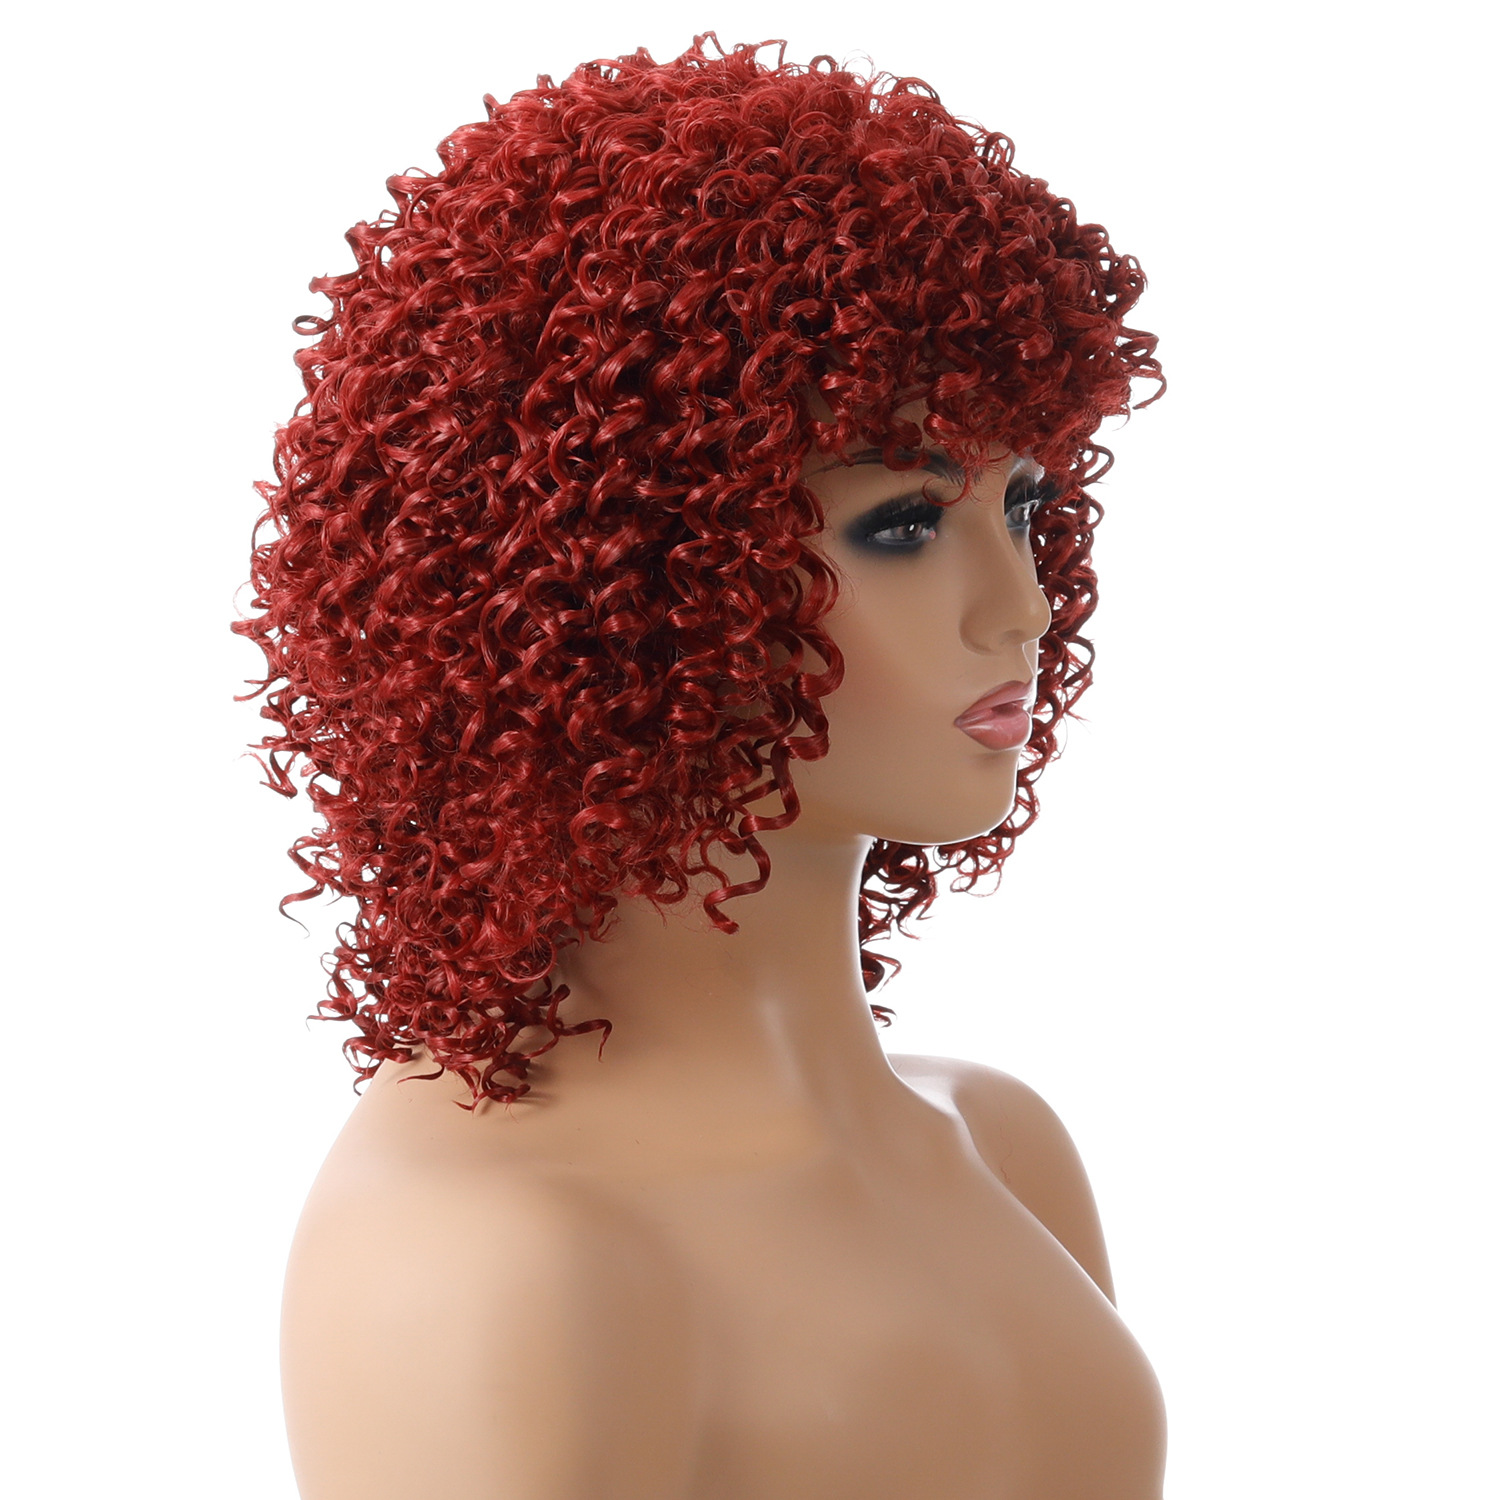 A wig with small curls featuring a variety of vibrant colors